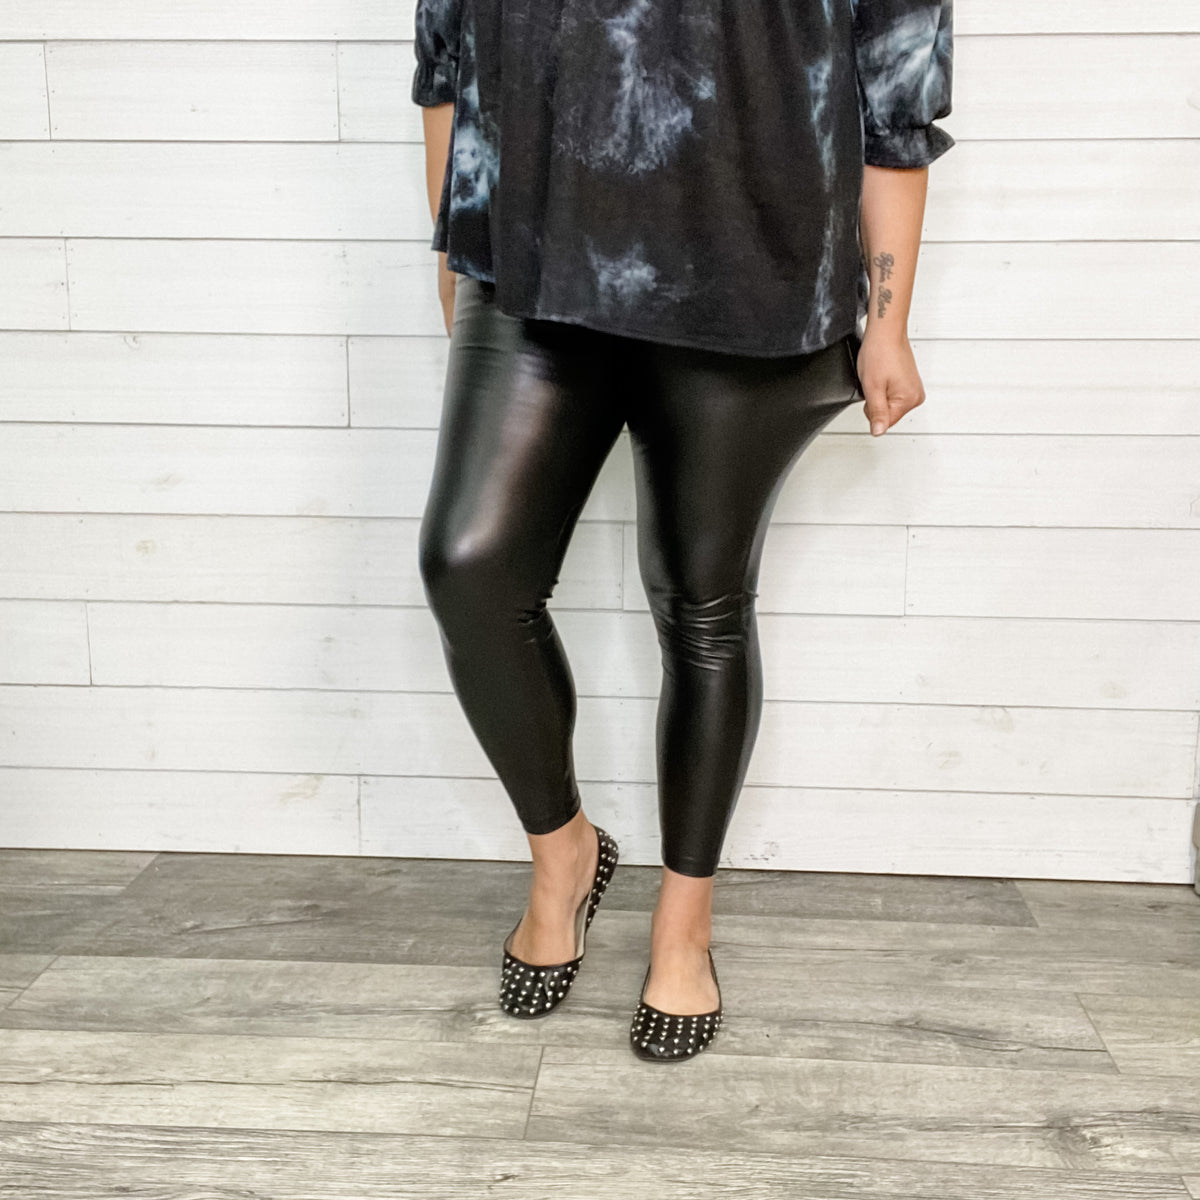 Vegan Leather "Date Night" Leggings with Wide Waist Band (Black)